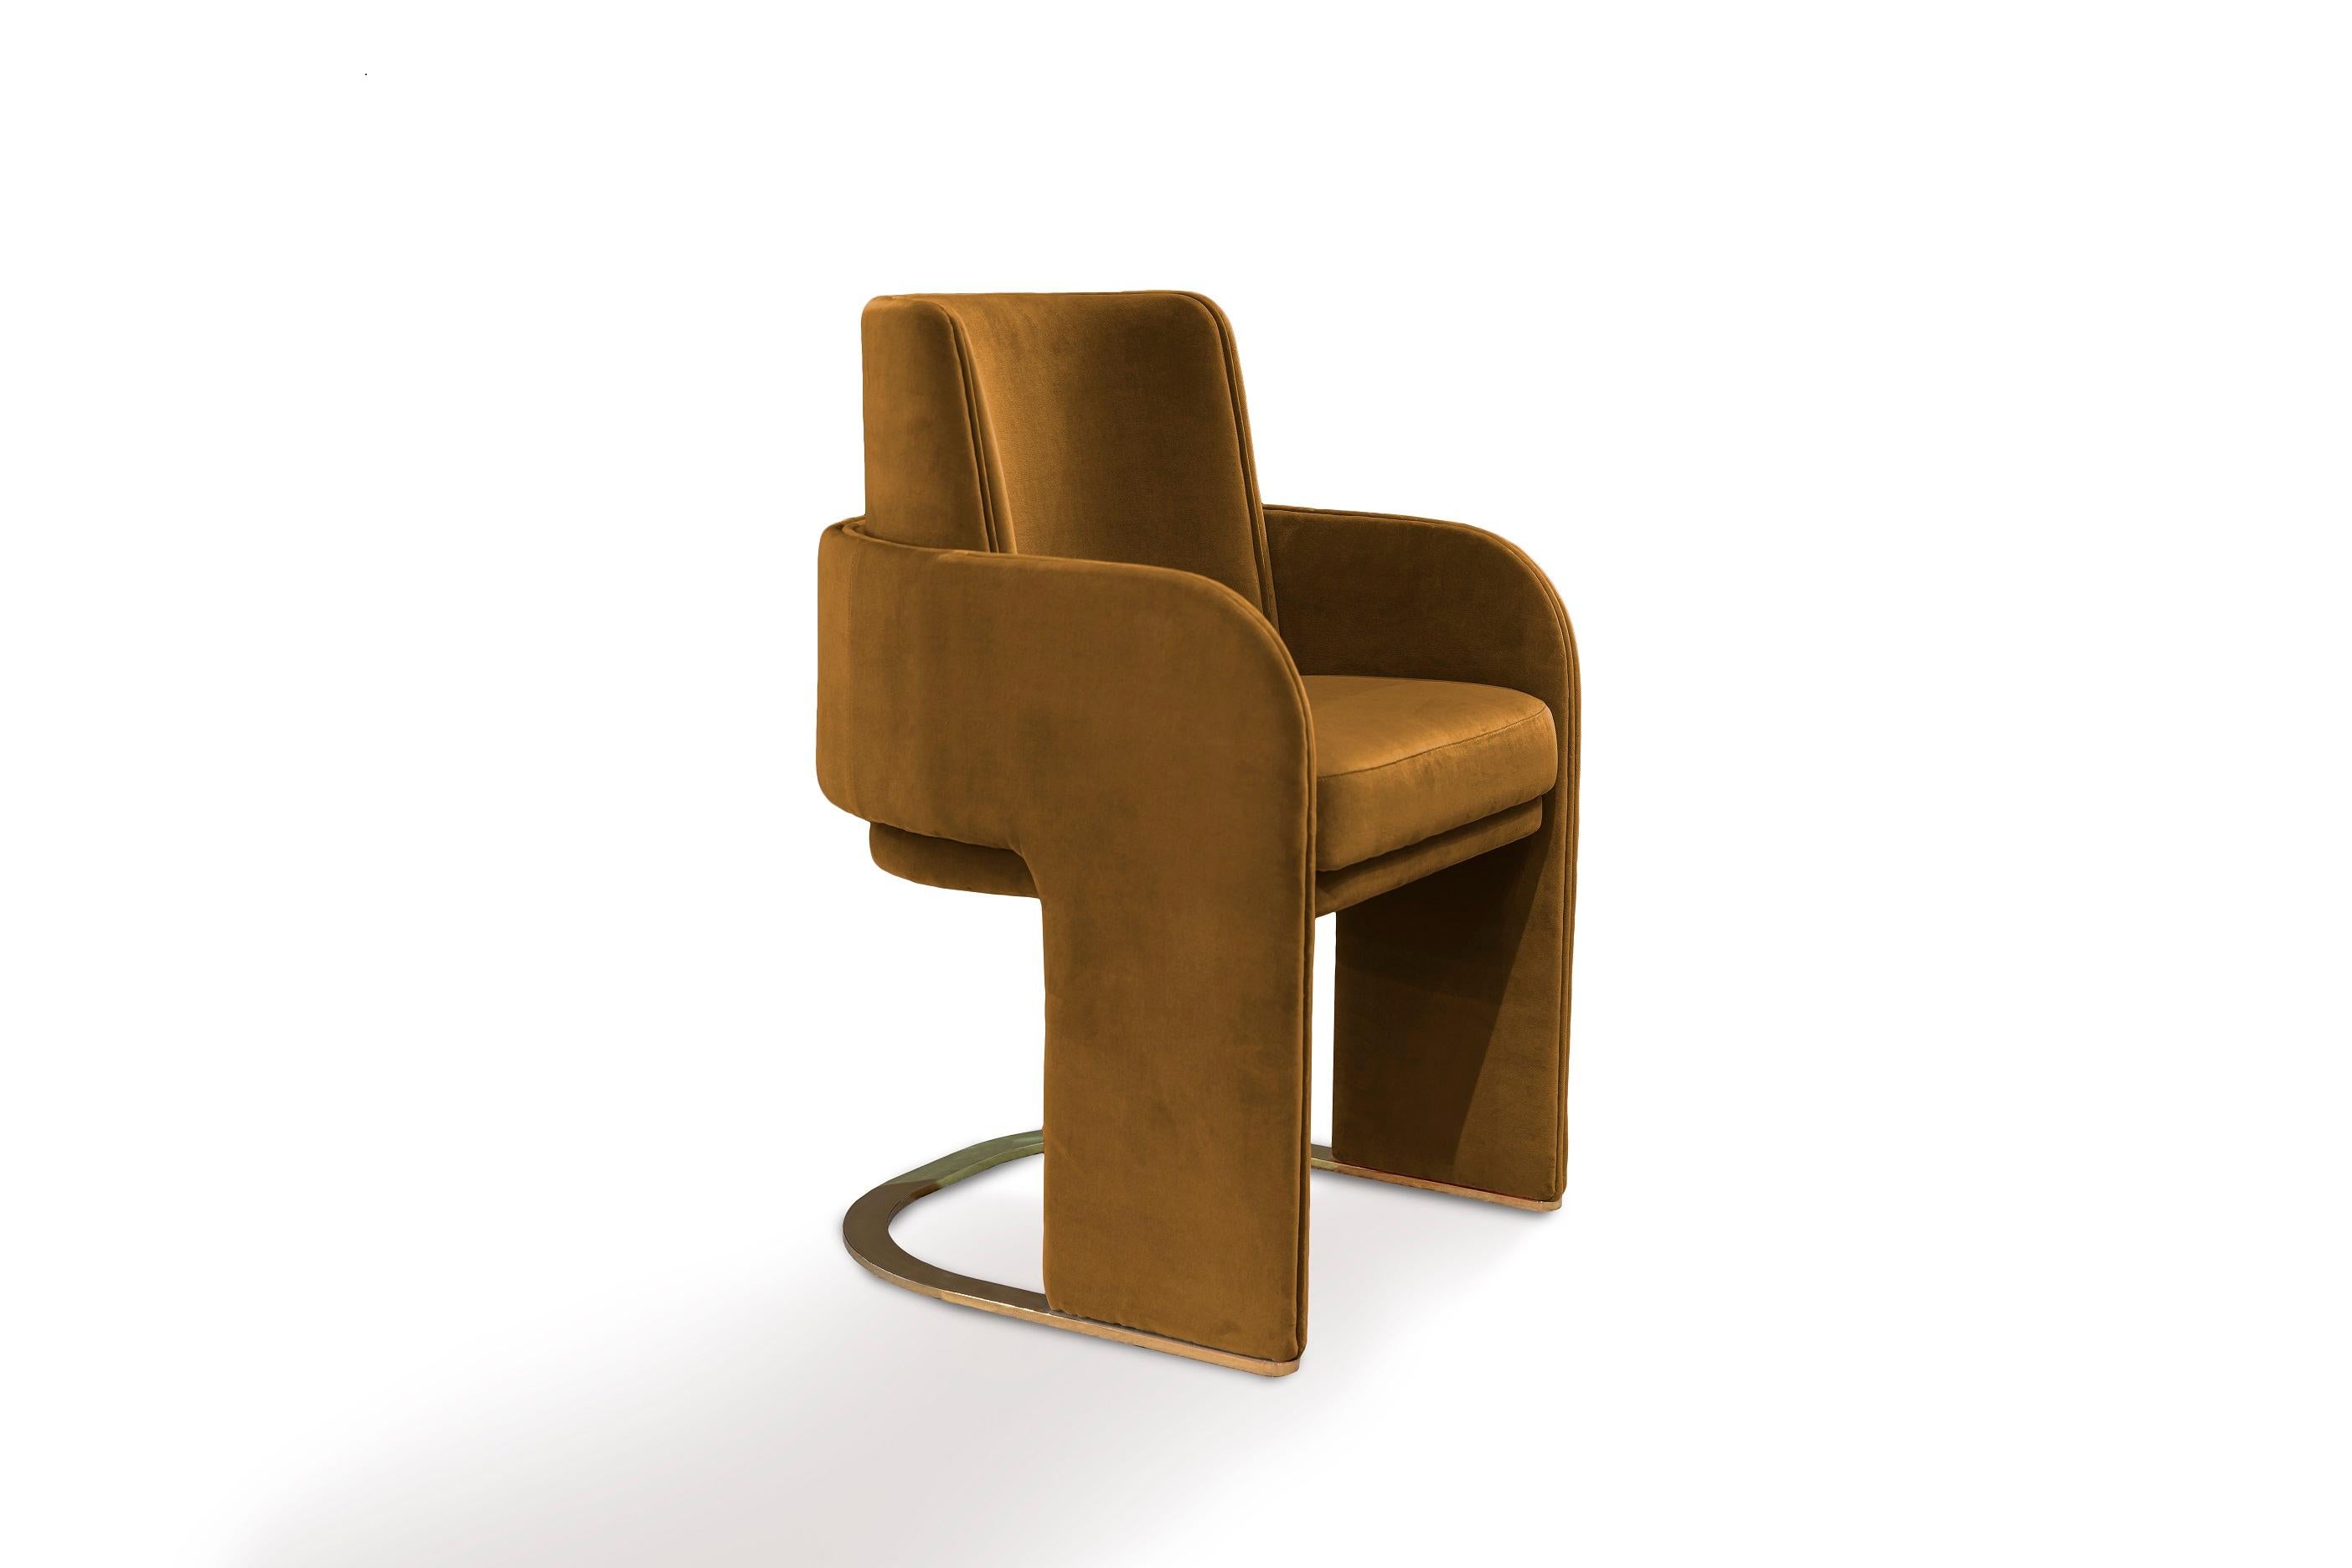 Odisseia chair embodies the aesthetic spirit of the Space Age, a new kind of discreet luxury and comfort inspired by a futuristic era created by new visual experiences and concepts of the future. This effortless but striking piece insinuates a luxe